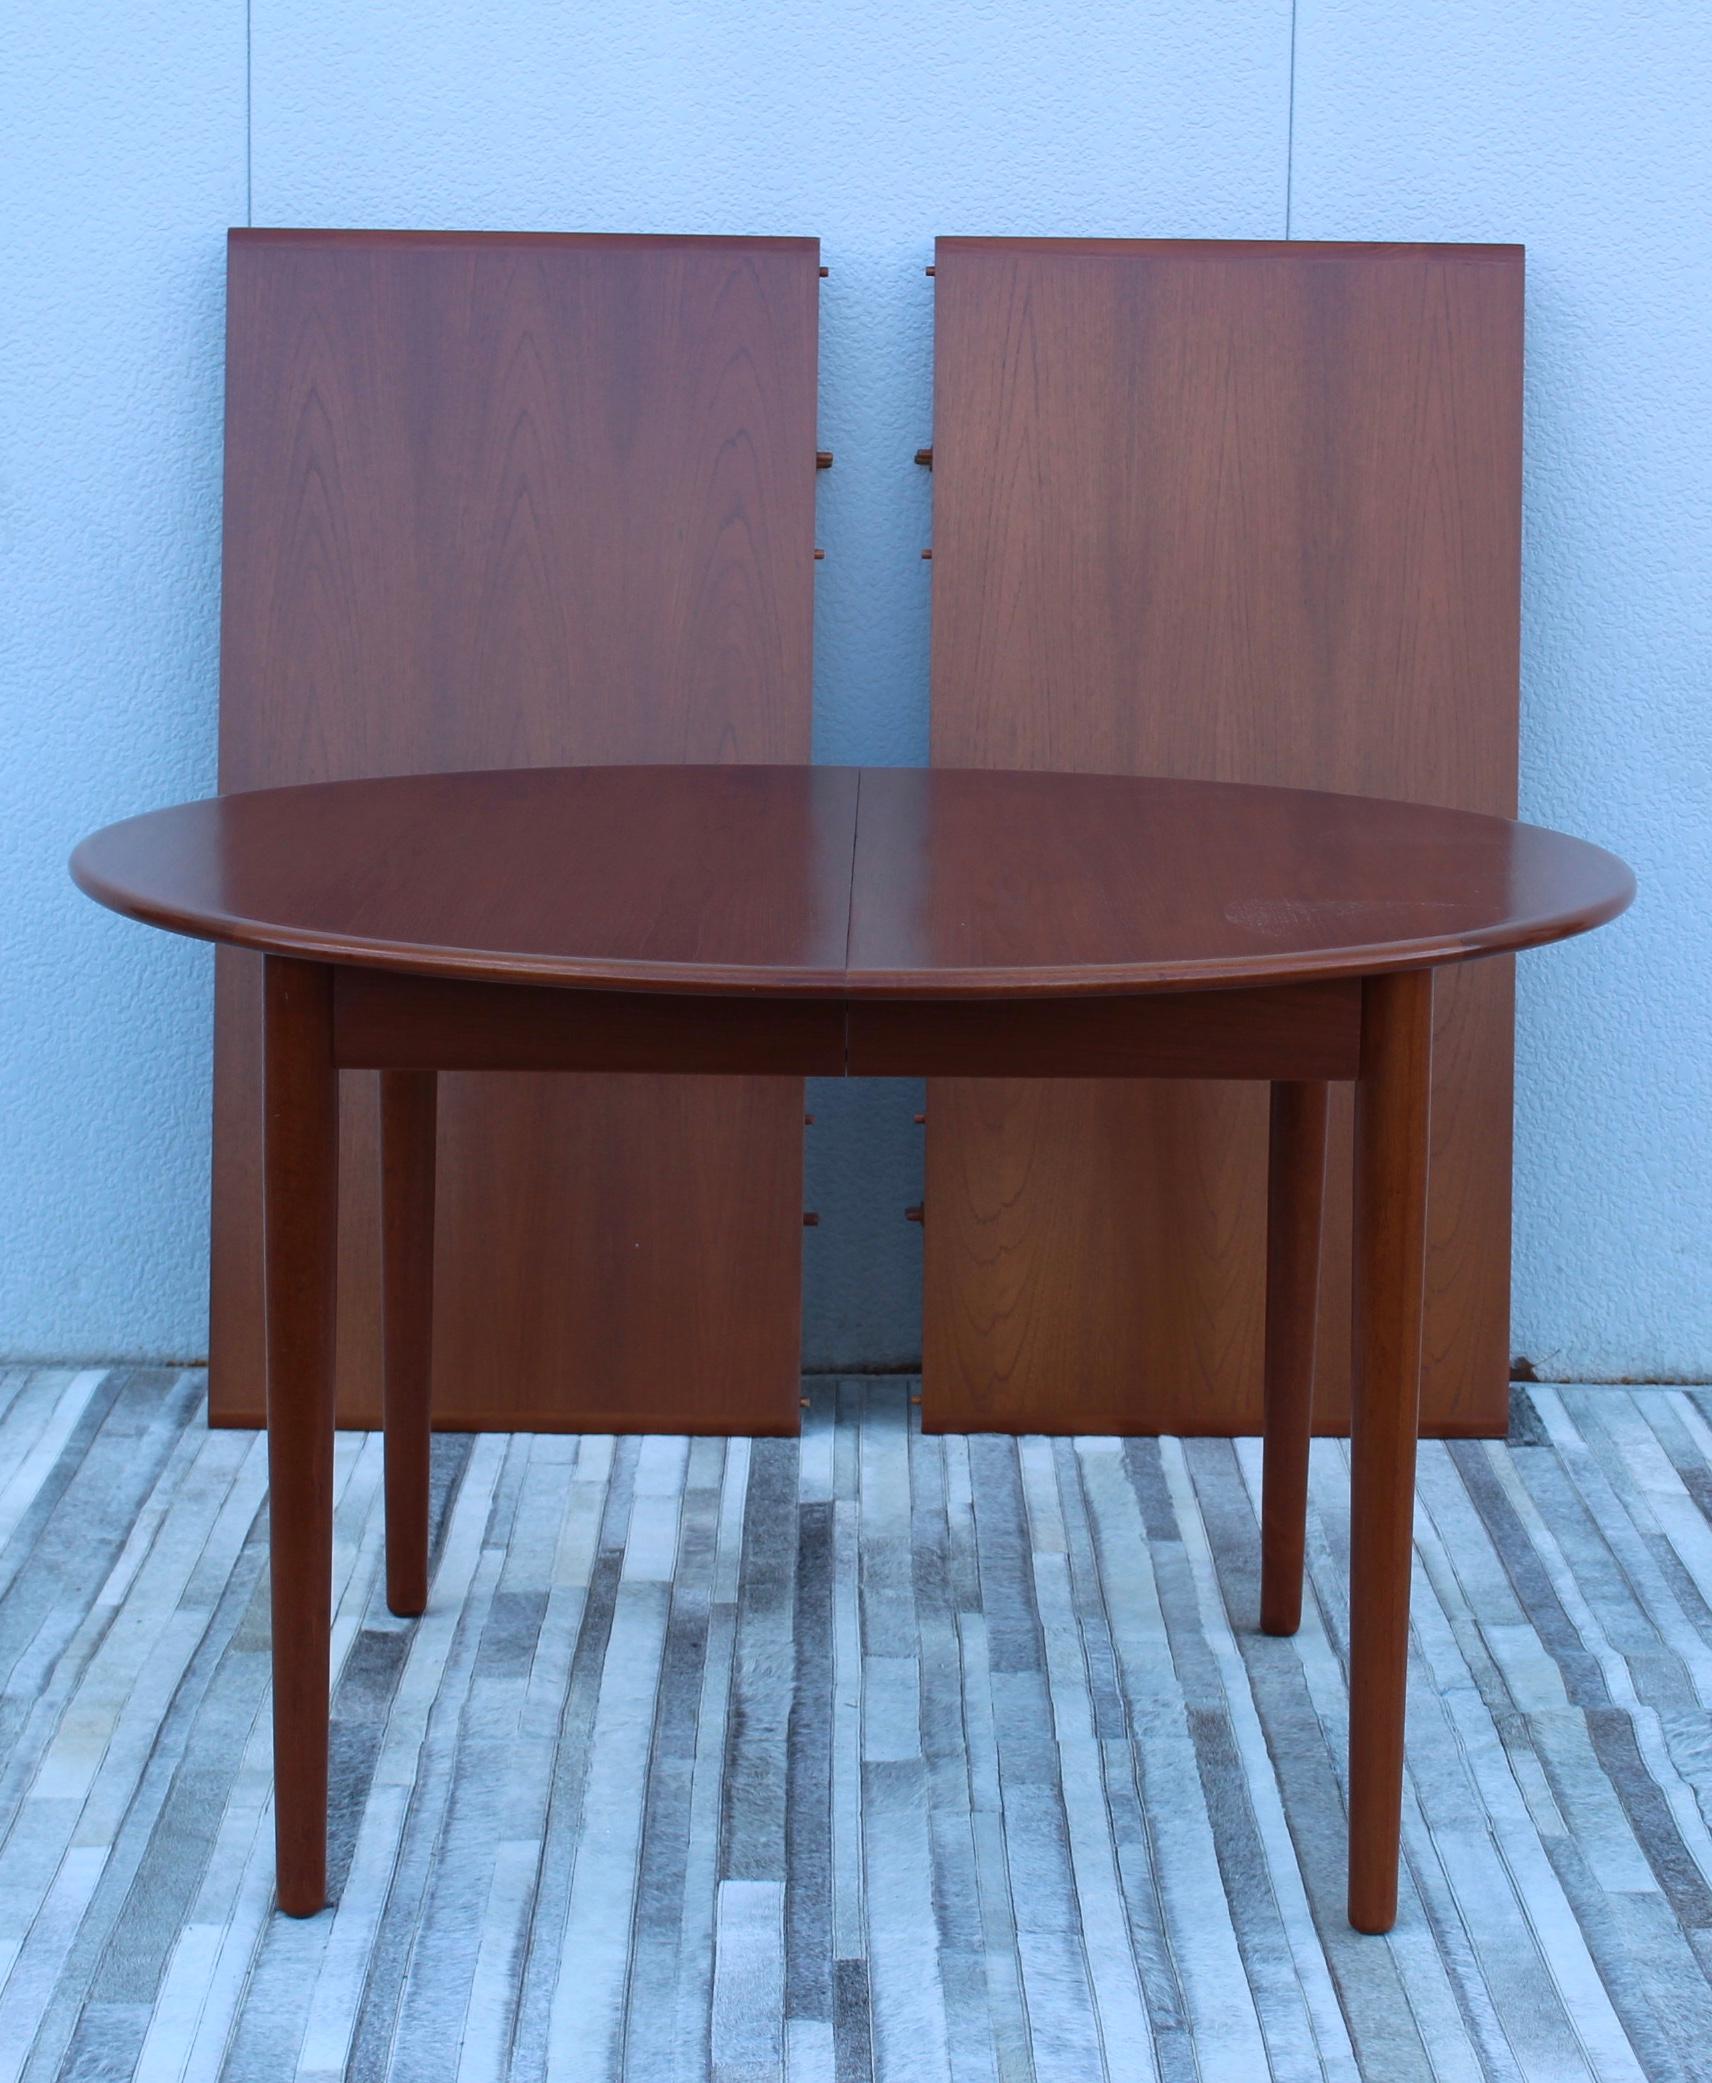 Stunning 1960's Mid-Century Modern round teak Danish dining table with two leaves, fully restored with minor wear and patina due to age and use.

Each leave is 23.5'' wide table without the leaves is 48'' diameter.